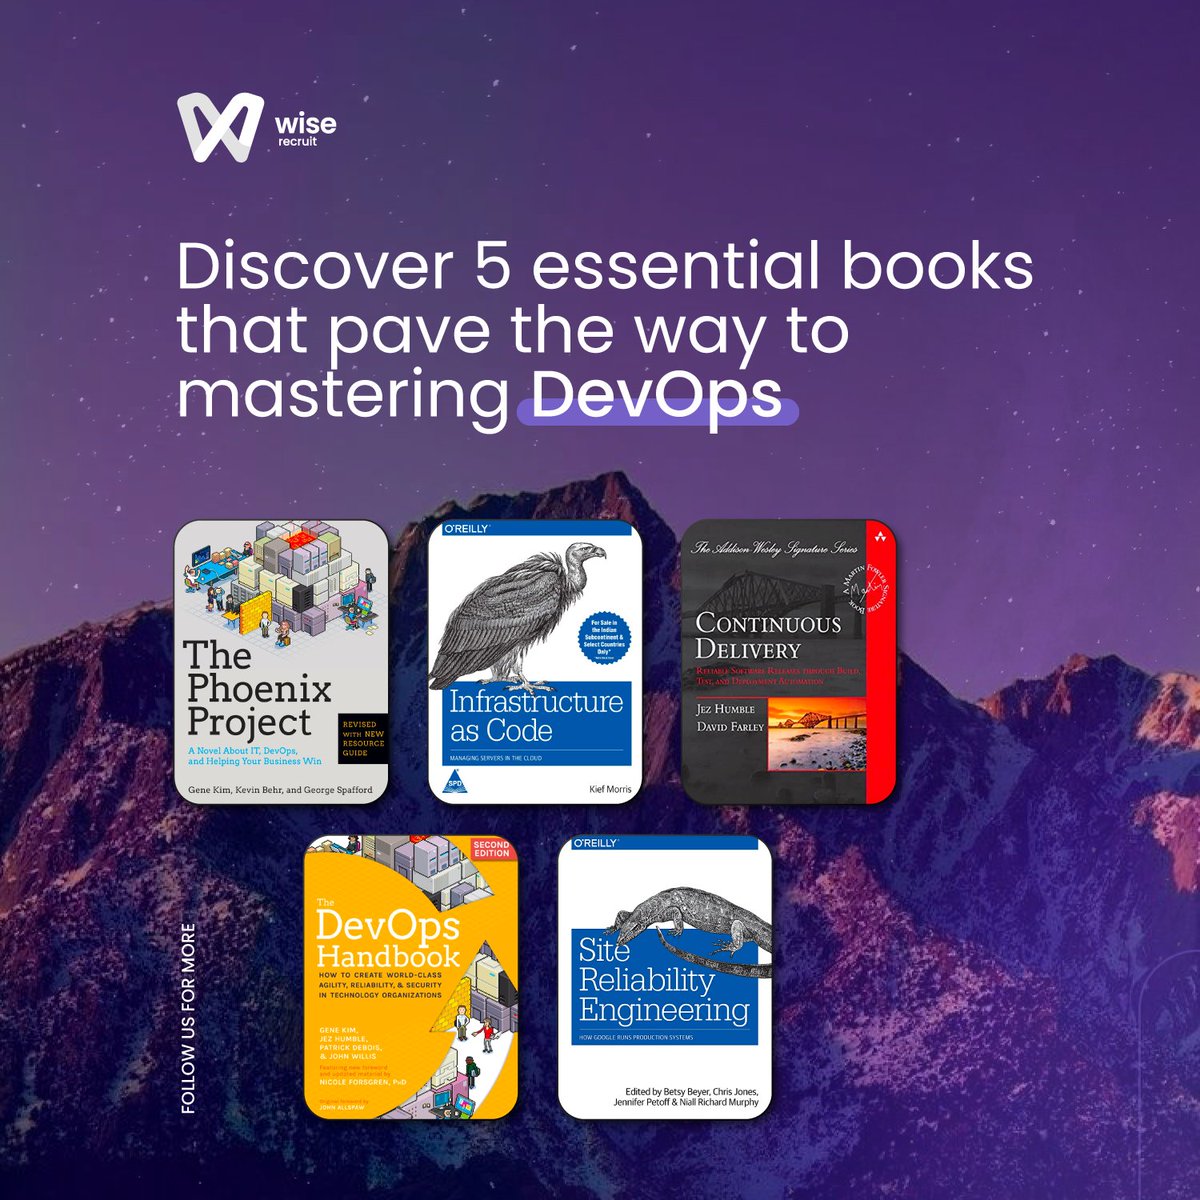 Discover the essential DevOps reads that will elevate your knowledge and empower your tech journey! 📚 Five highly recommended books to explore!

Happy reading! 📖✨

#DevOps #BookRecommendation #ContinuousDelivery #SiteReliabilityEngineering #InfrastructureAsCode